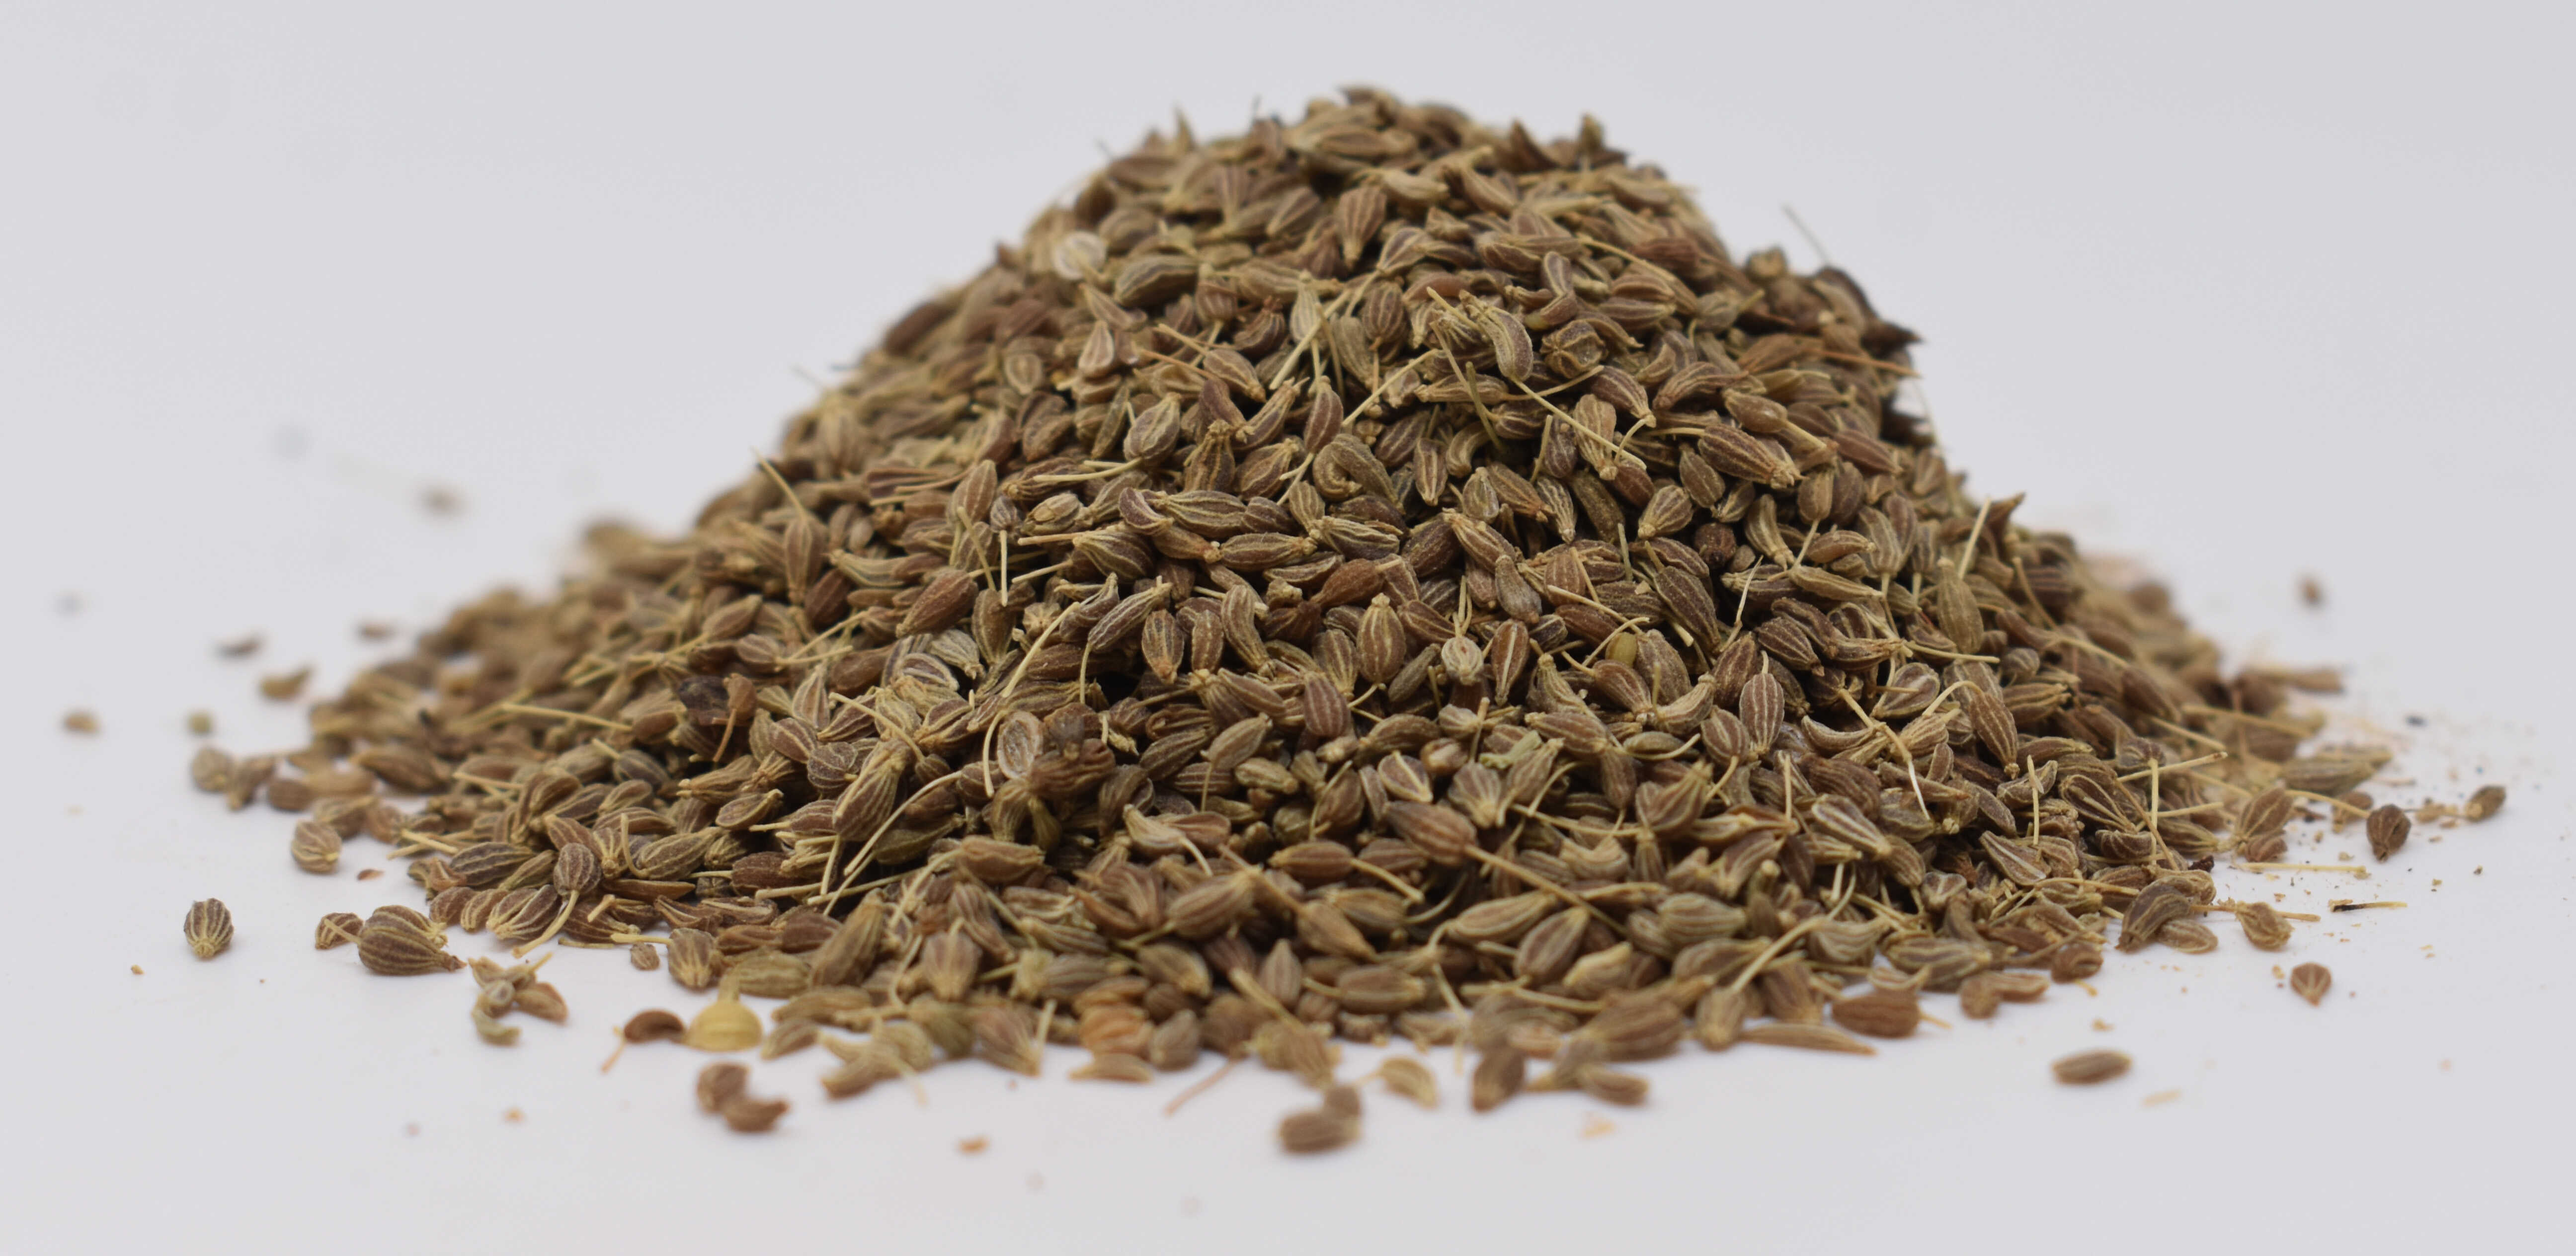 Anise Seed - Side Photo